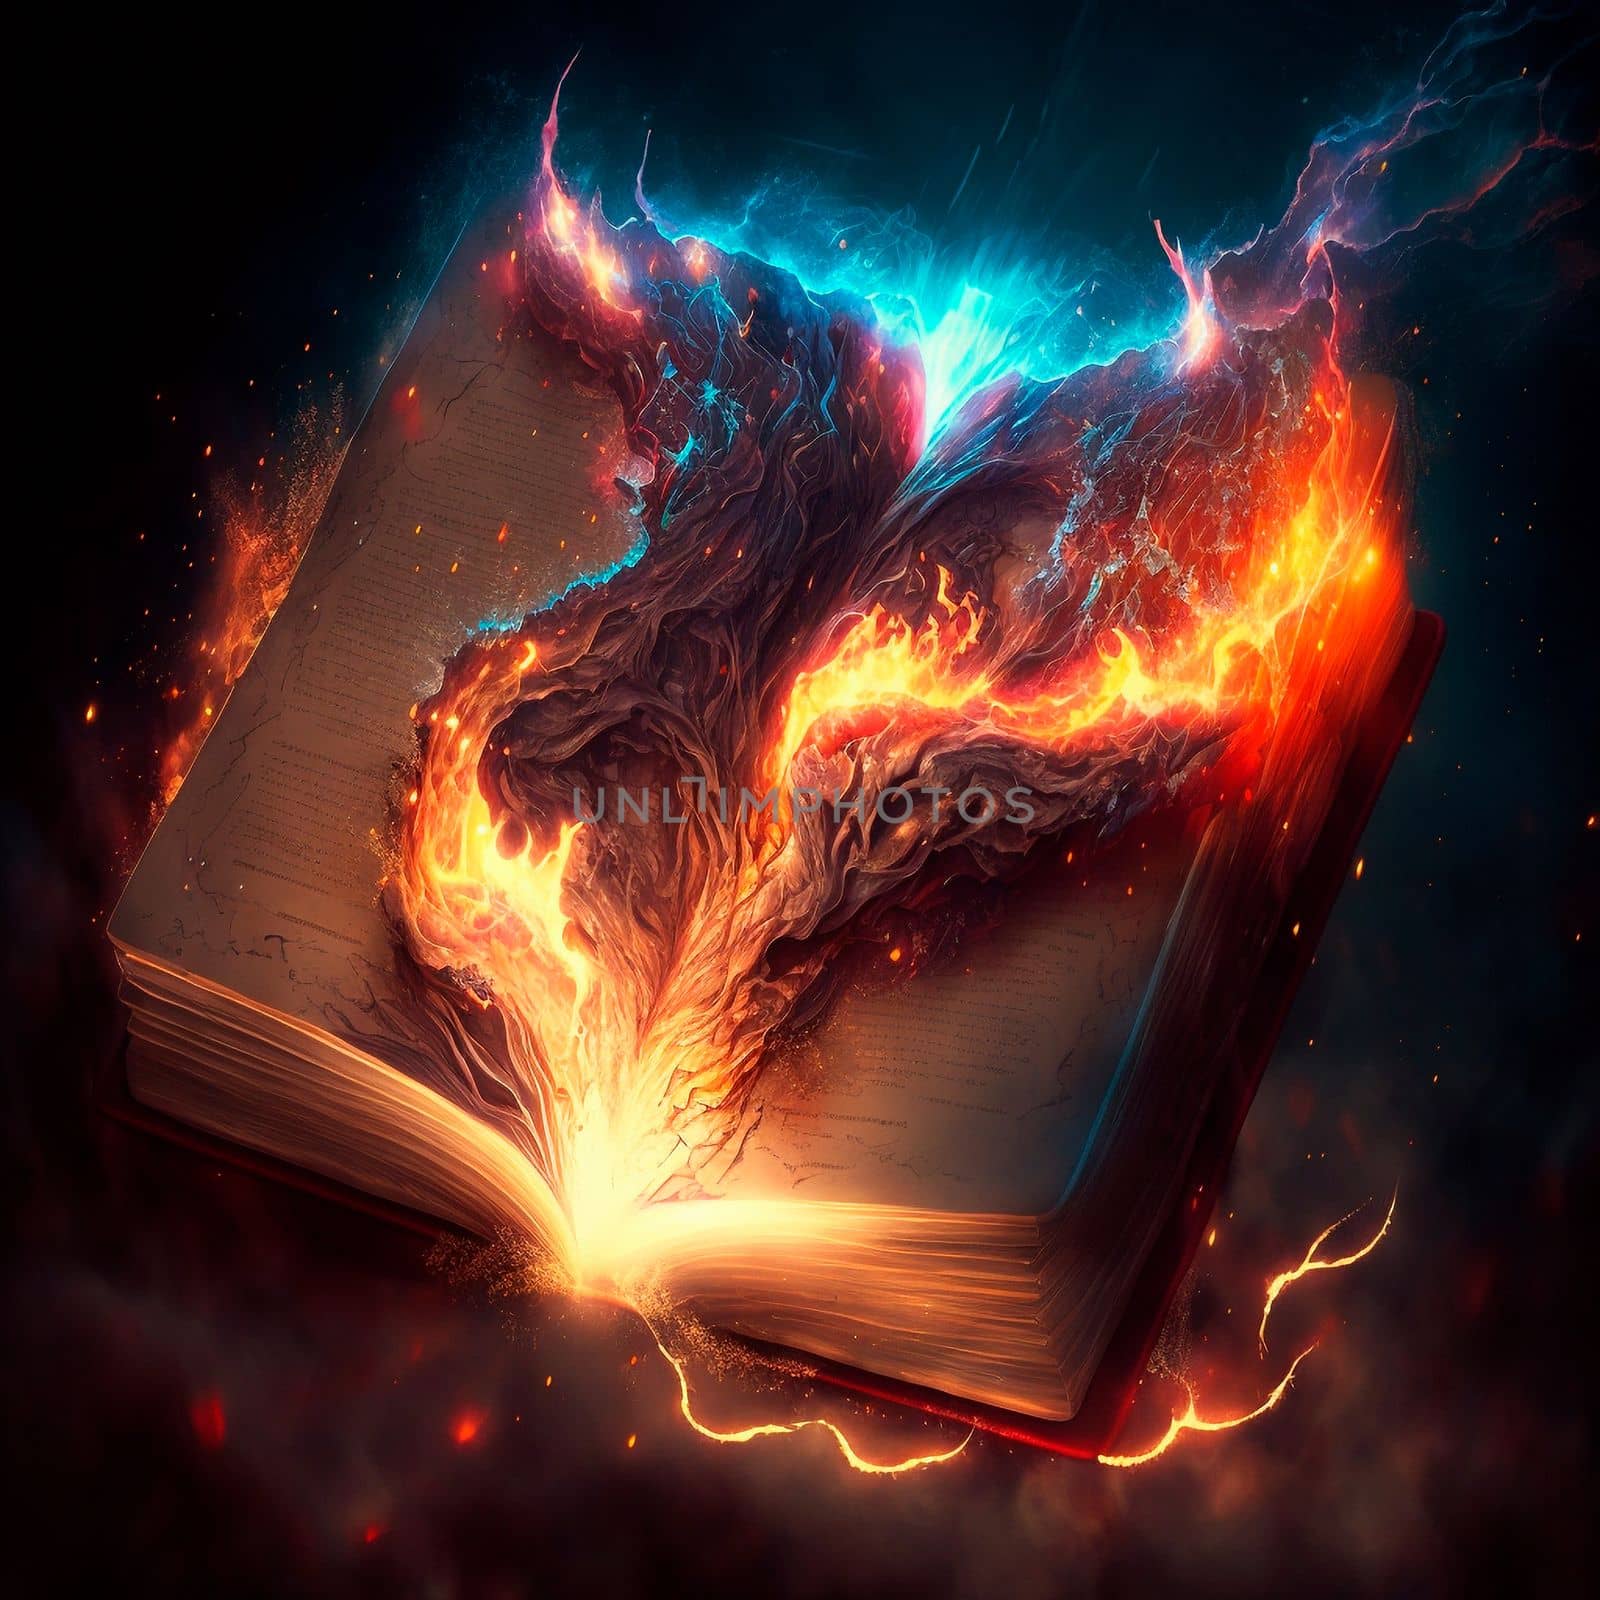 A magical book engulfed in flames and lightning by NeuroSky